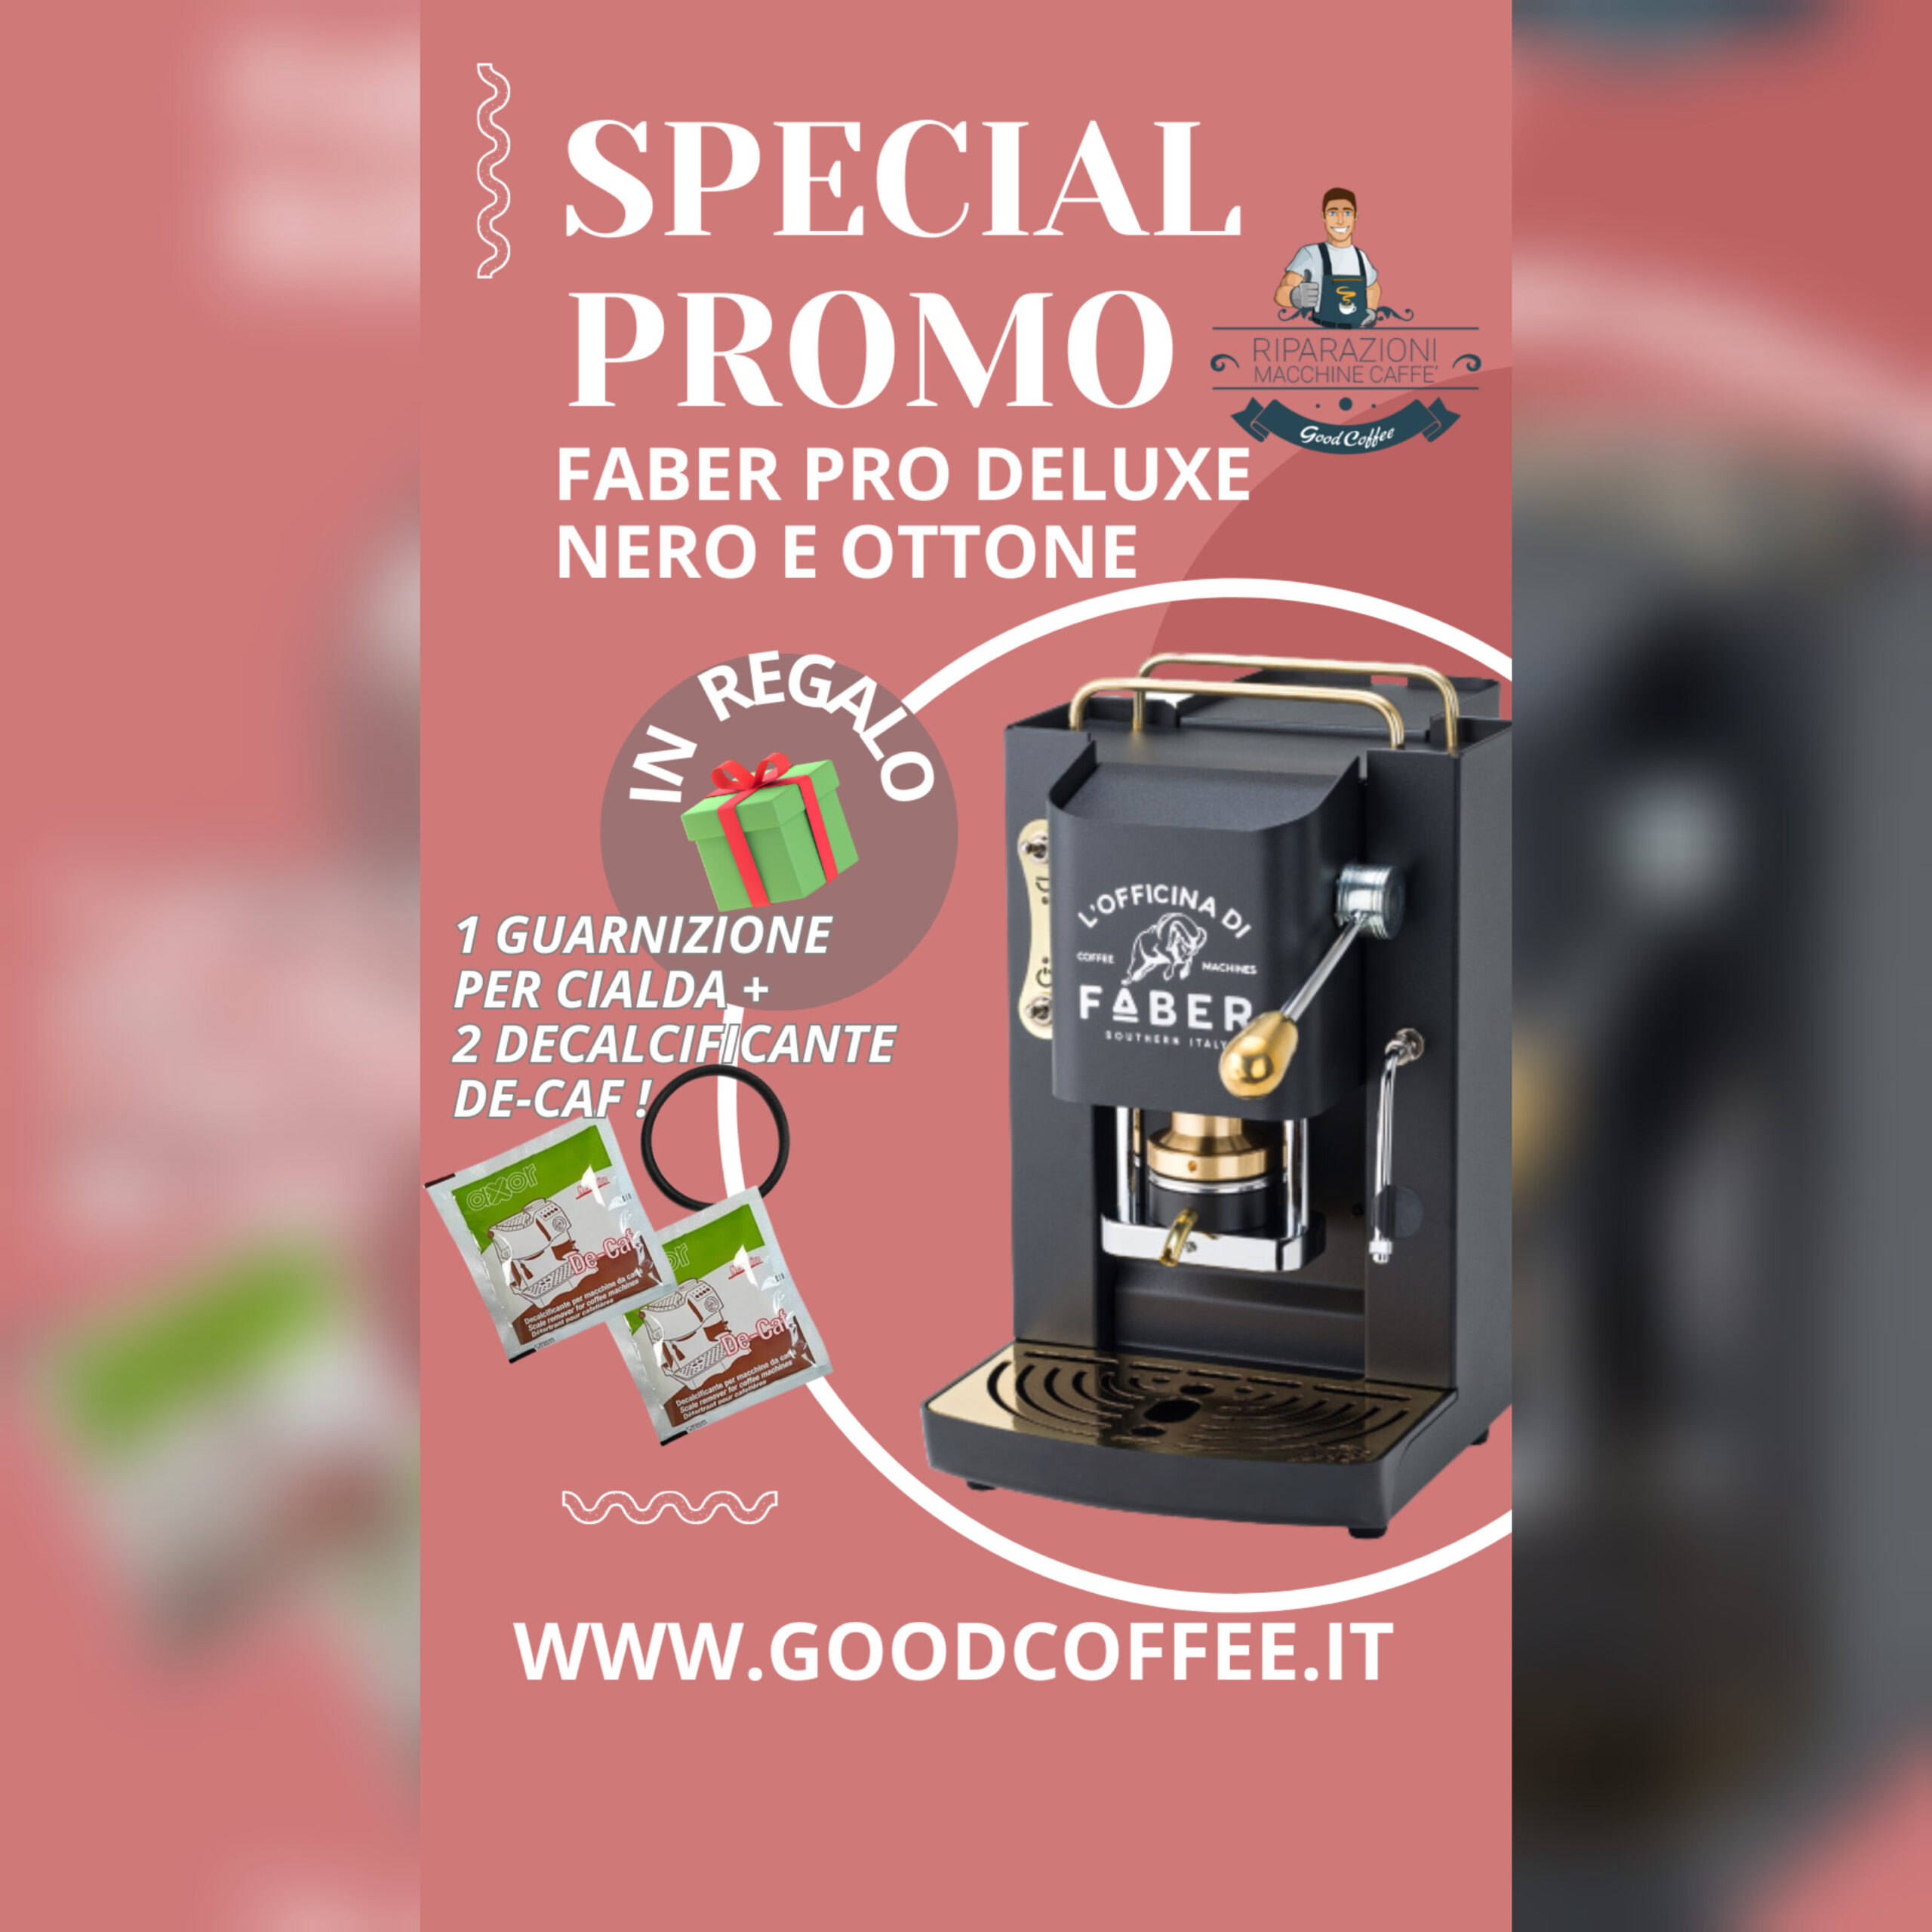 Faber Pro Deluxe - Assistenza GoodCoffee